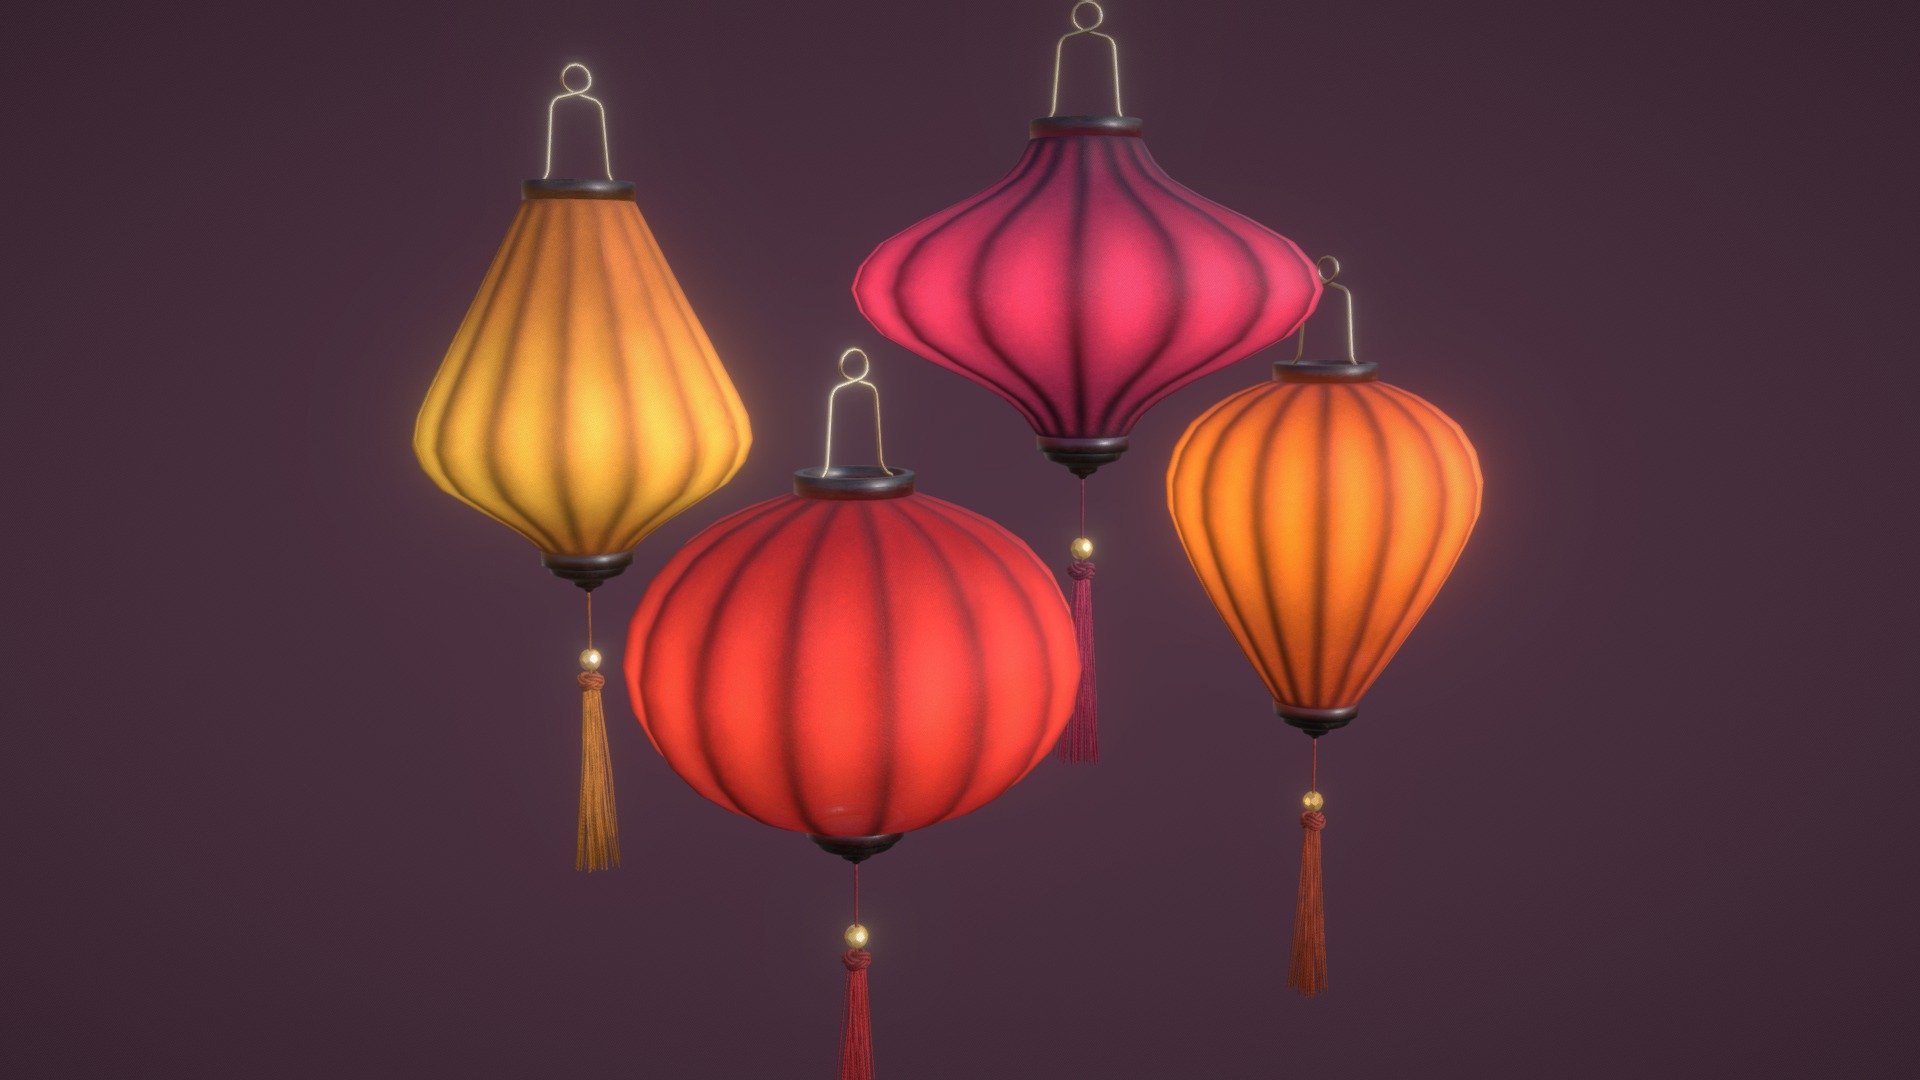 Detailed models of silk lanterns in 4 different shapes and 4 different colors.
Сolorful and glowing lanterns will decorate and fill with Asian motifs any location.

And also add realism and festive atmosphere to your 3D project, game or metaverse:)




Video about the model


Model info



clean topology, one lantern - 4.5k faces, a full set of 16 lanterns - 73k faces

clean unwrapped UV

16 sets of texture maps (BaseColor, Opacity, Metallic, Roughness, Normal, Emission) in 2K and 1K resolution

16 materials

ready to use in blend, fbx and obj formats

Built with Blender. Origin Blender file attached.


Thanks for watching^.^
Have questions about the model? Mail me: tochechkavhoda@gmail.com - Asian silk lanterns (3D) - Buy Royalty Free 3D model by tochechka 3d model